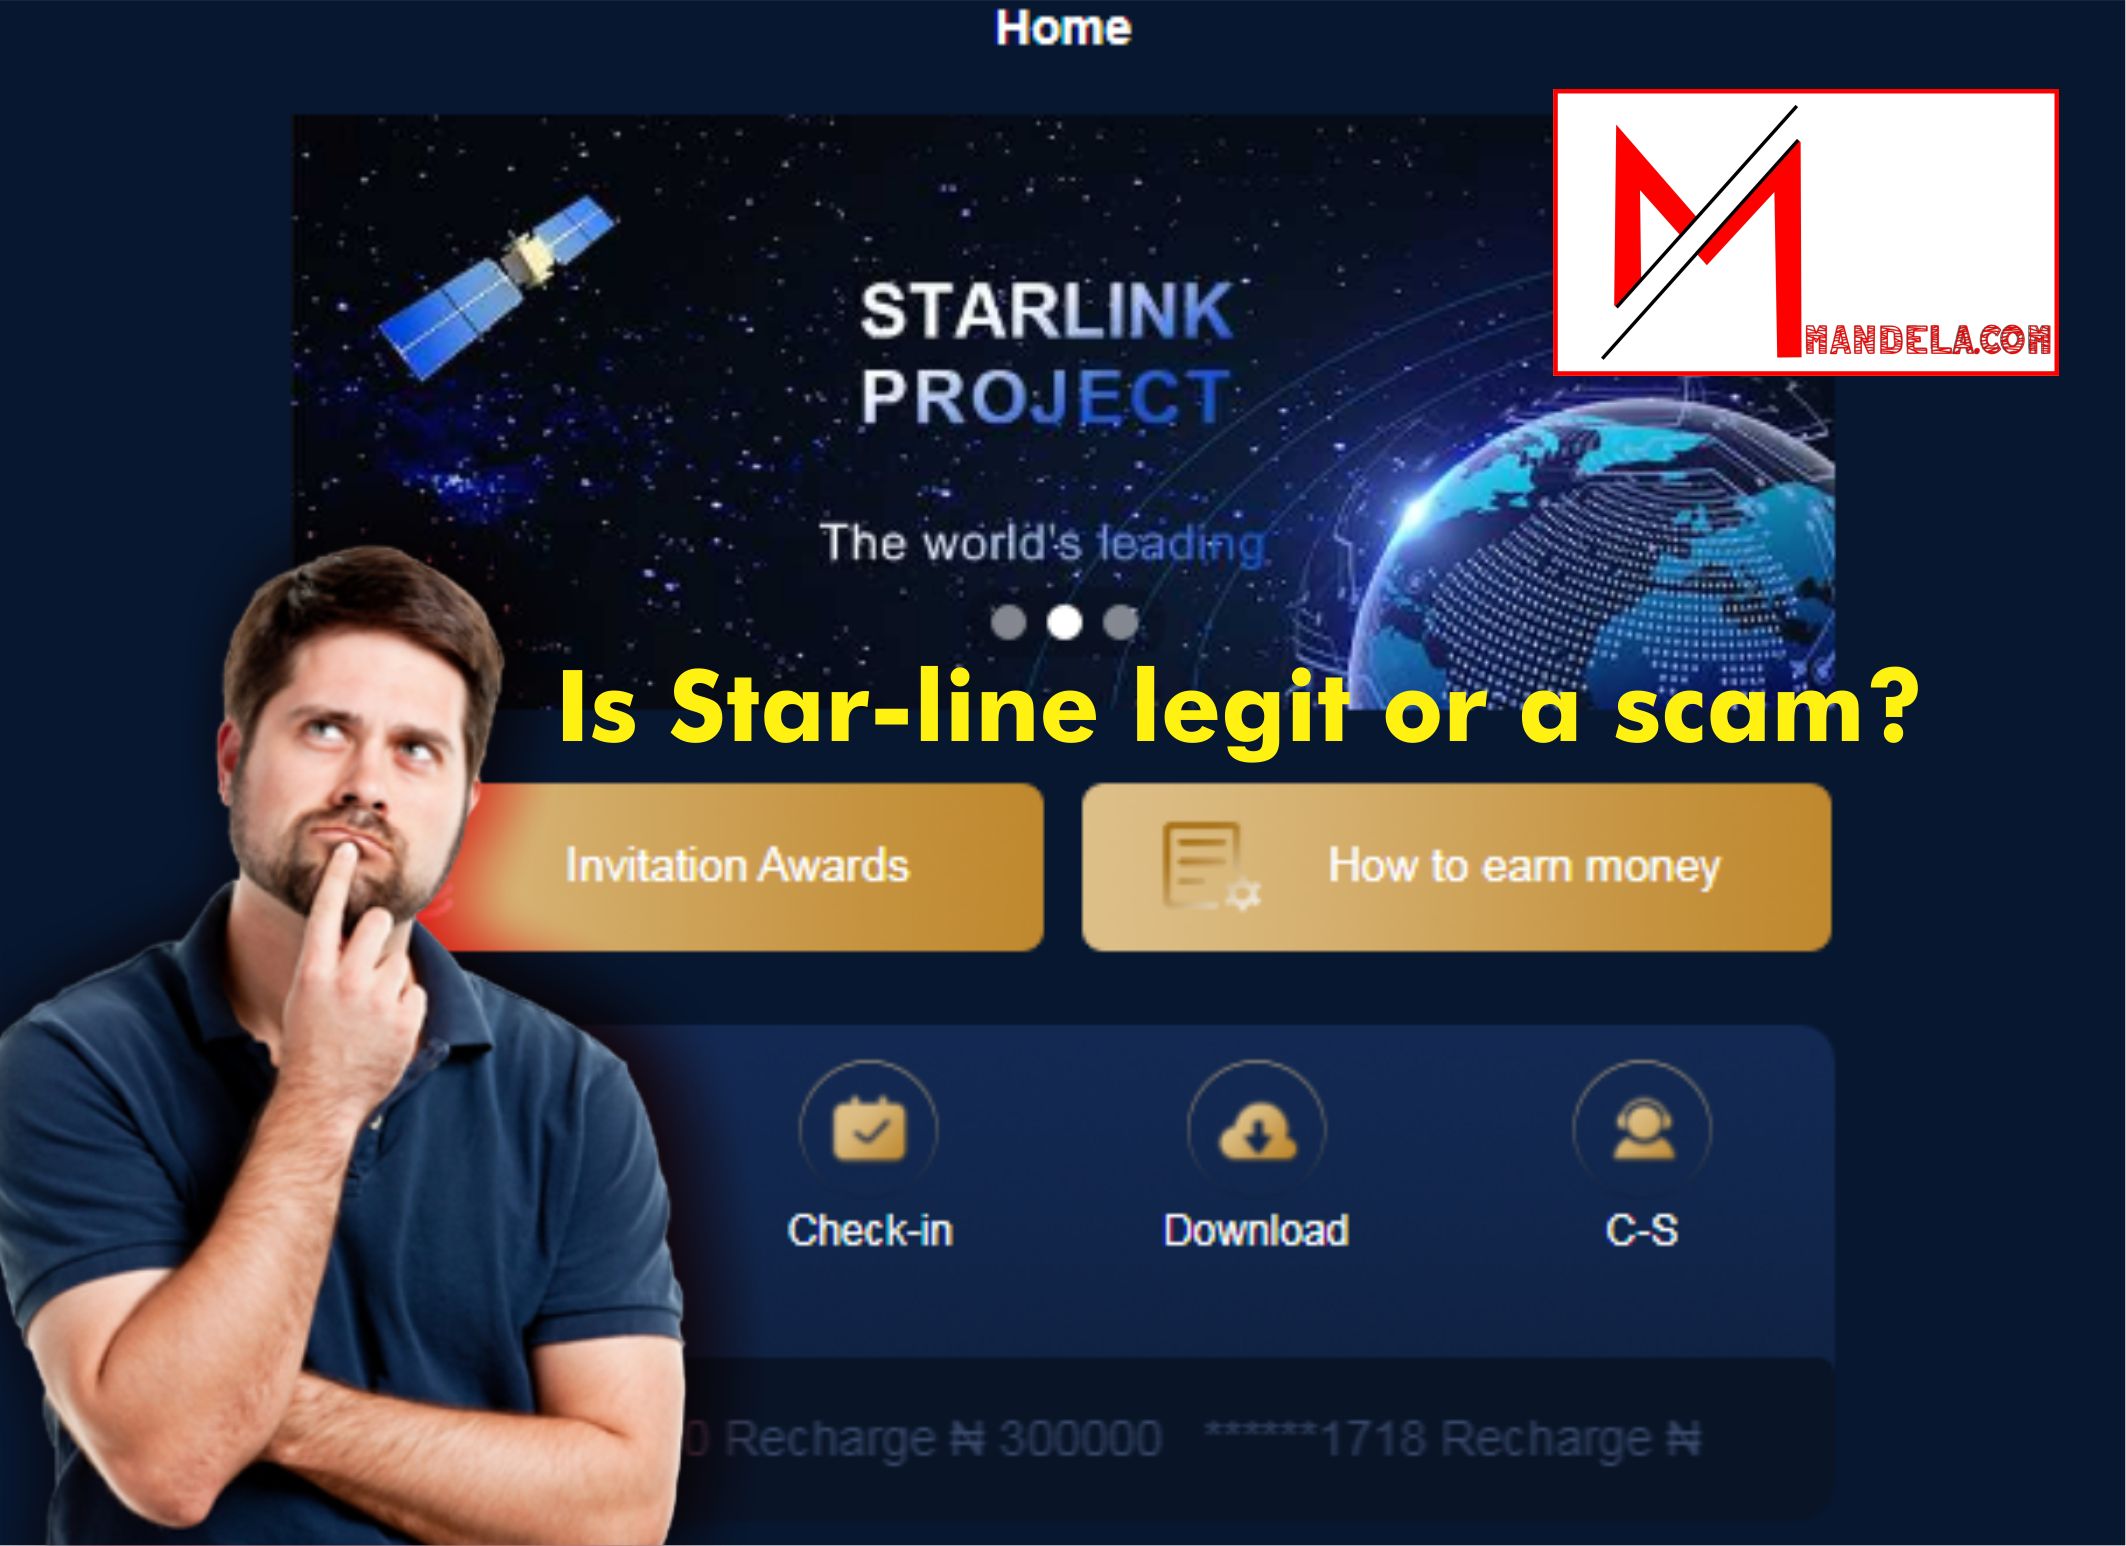 Star-line.cc review (Is Star-line legit, a scam or paying?)